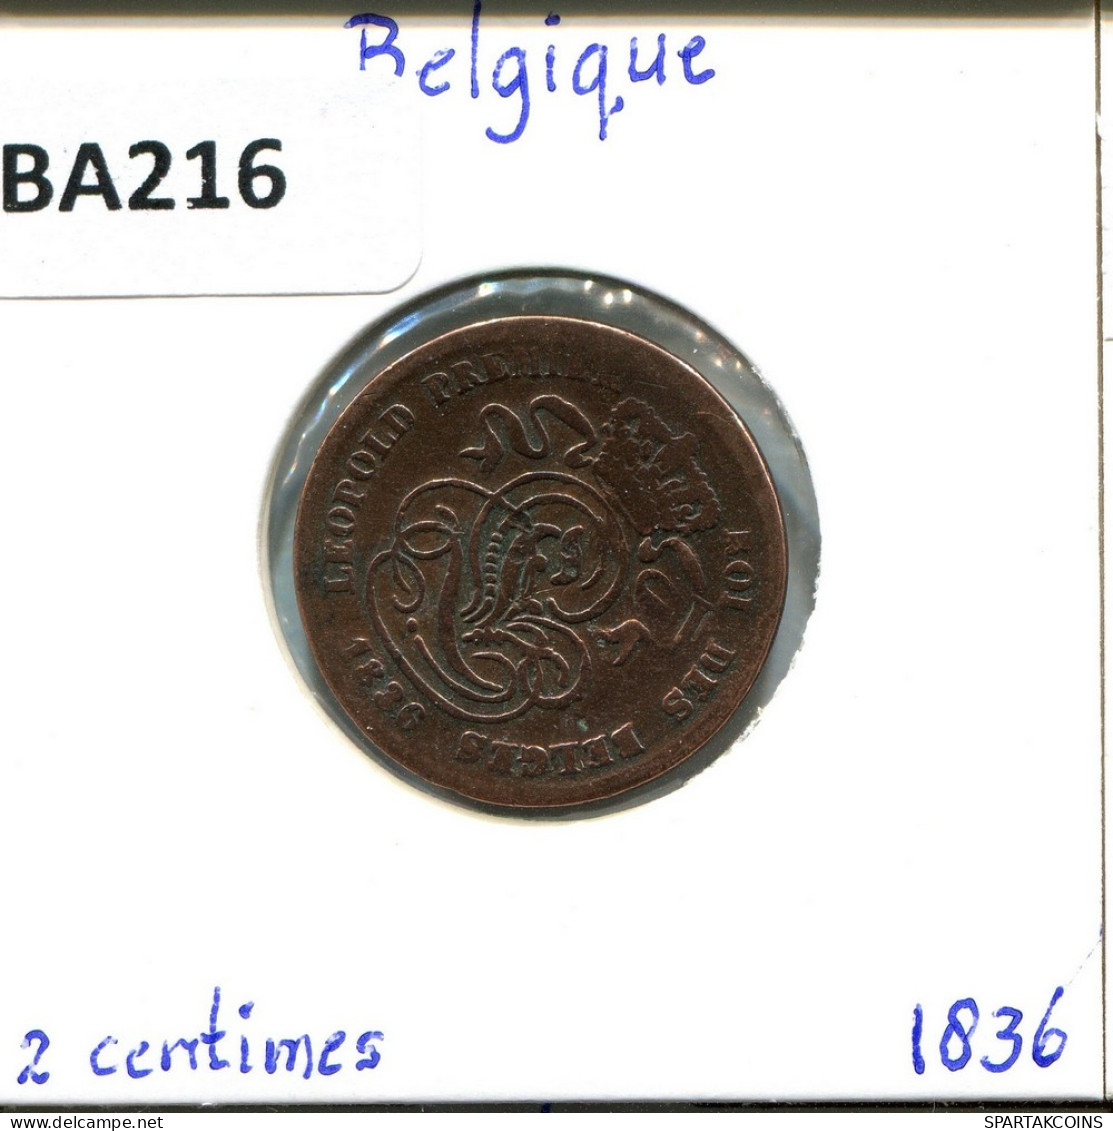 2 CENTIMES 1836 FRENCH Text BELGIUM Coin #BA216.U - 2 Cent